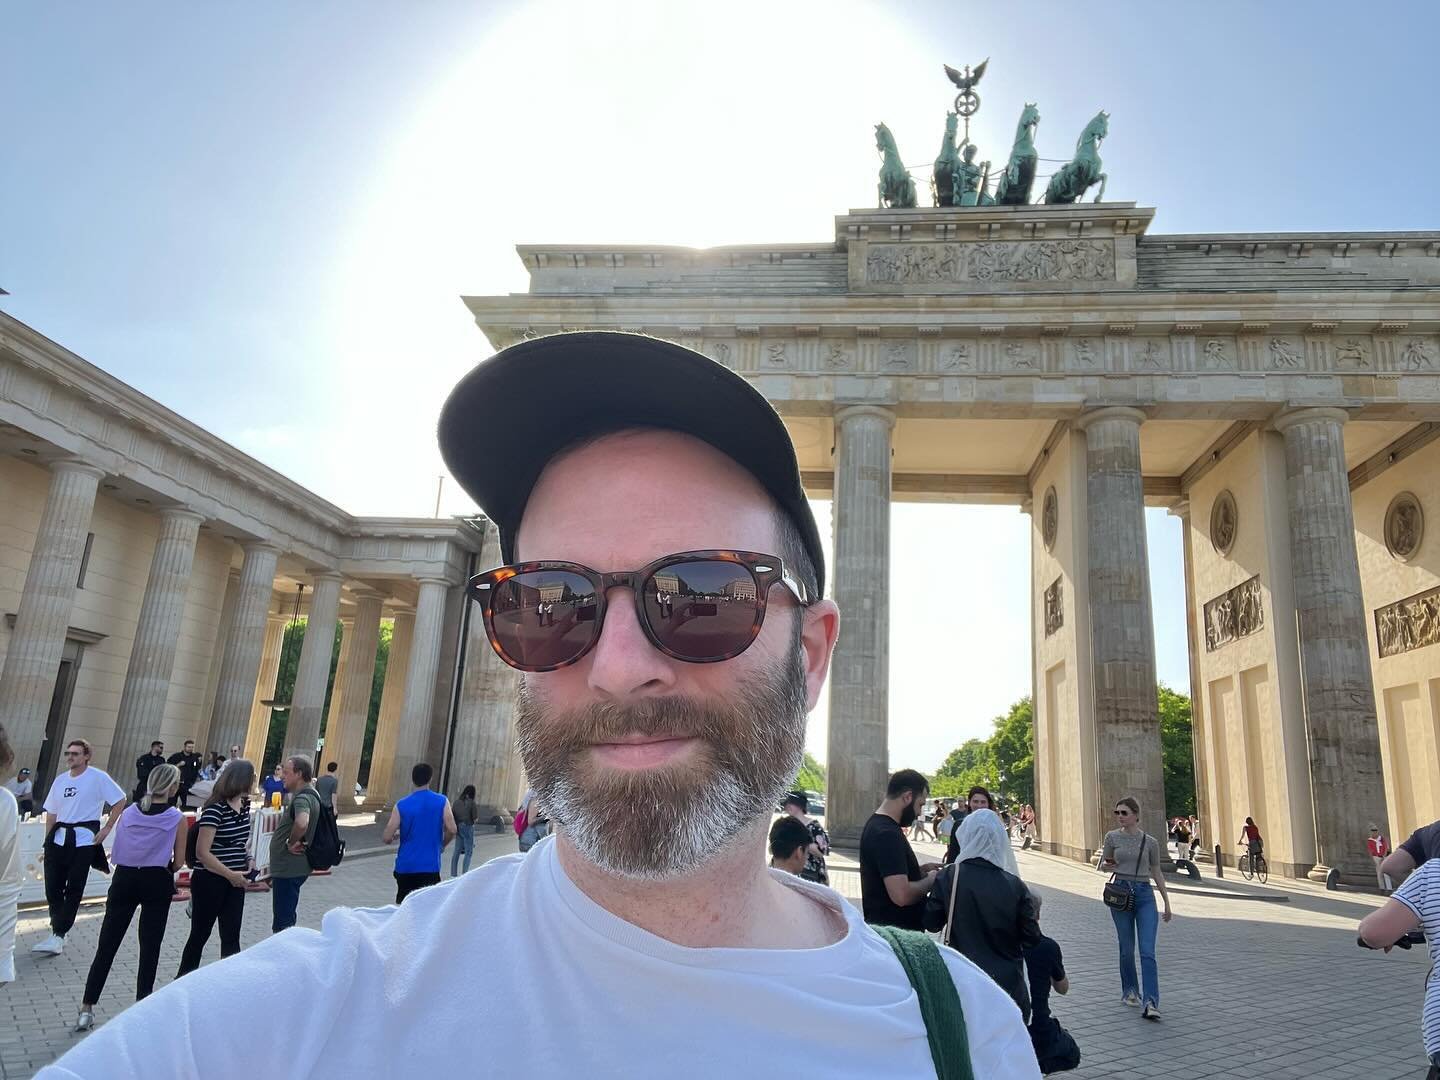 Back in Germany for another meeting of the Modern Expeditions network, this time in Berlin. Some establishing shots before turning to space stuff.